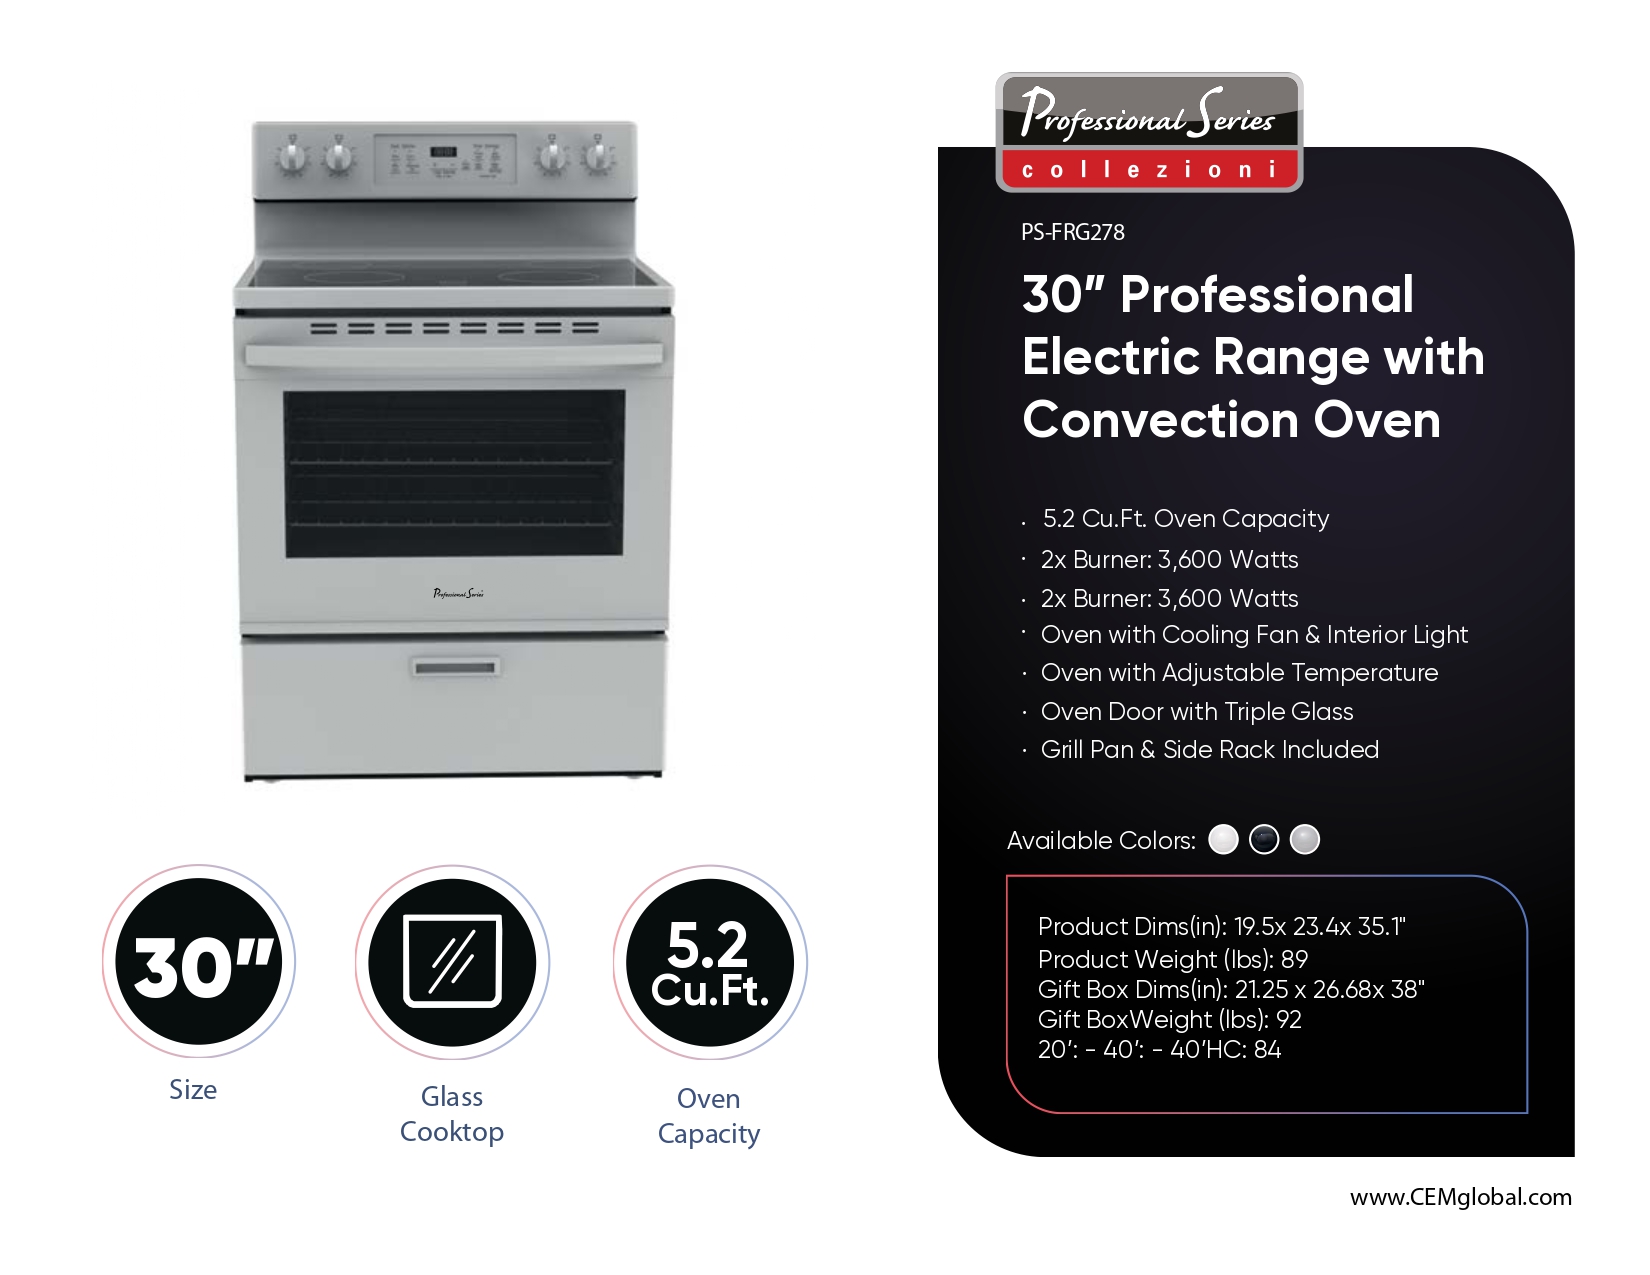 30” Professional Electric Range with Convection Oven